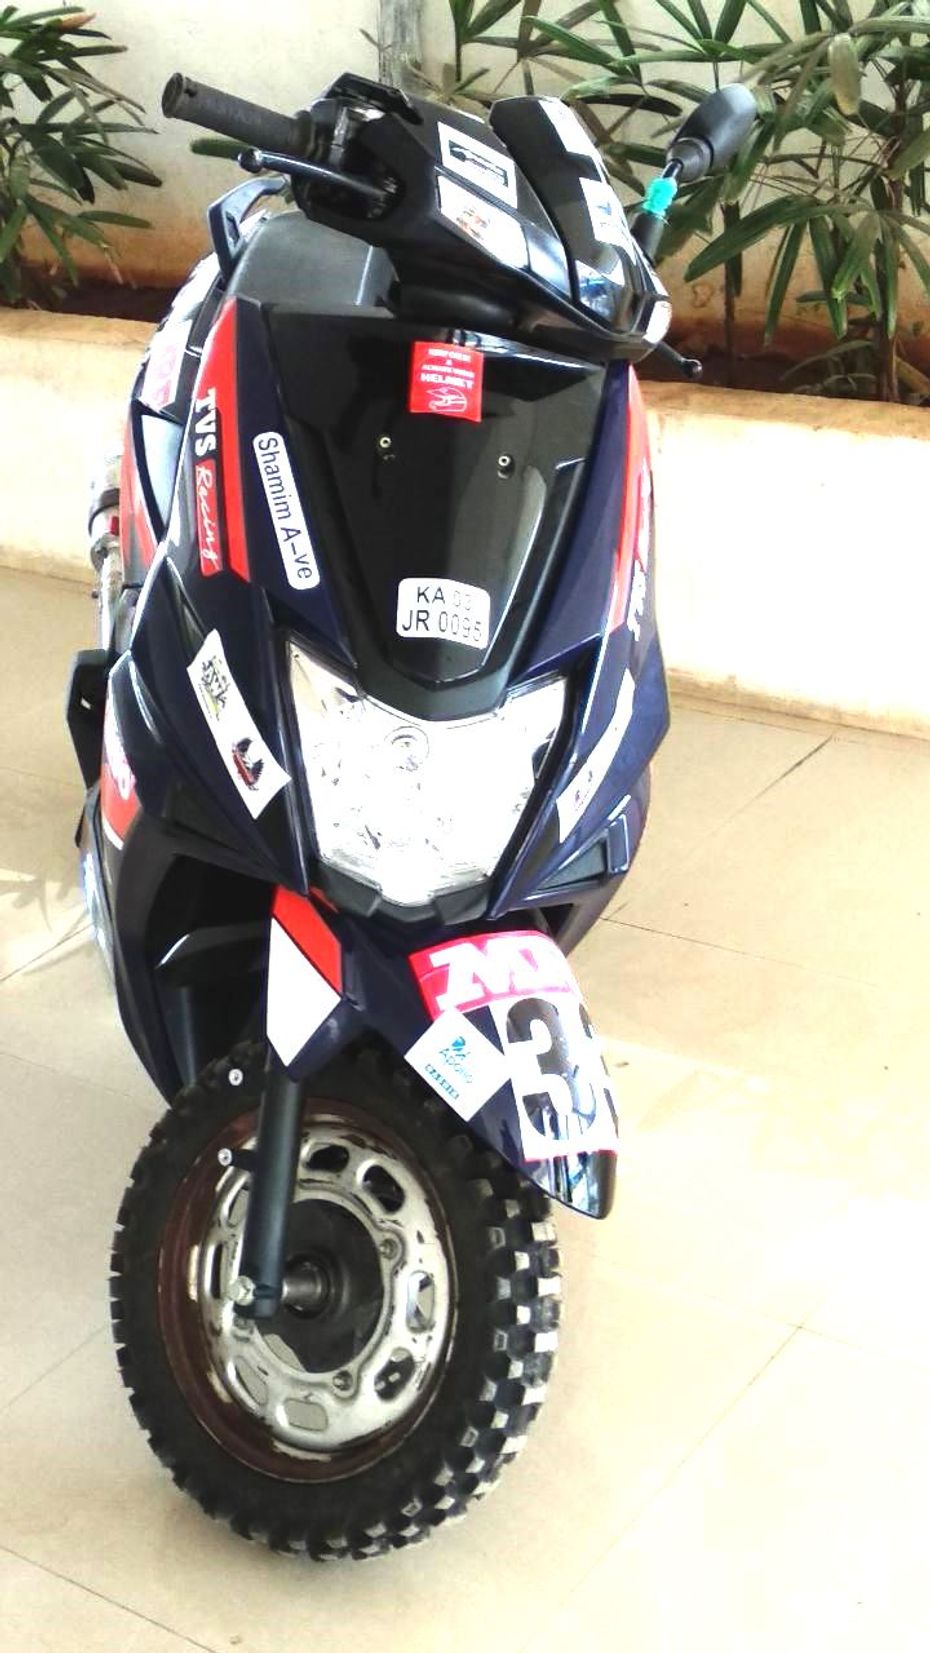 This Rally-Tuned TVS NTorq Makes Over 20PS And Can Do 120+kmph!